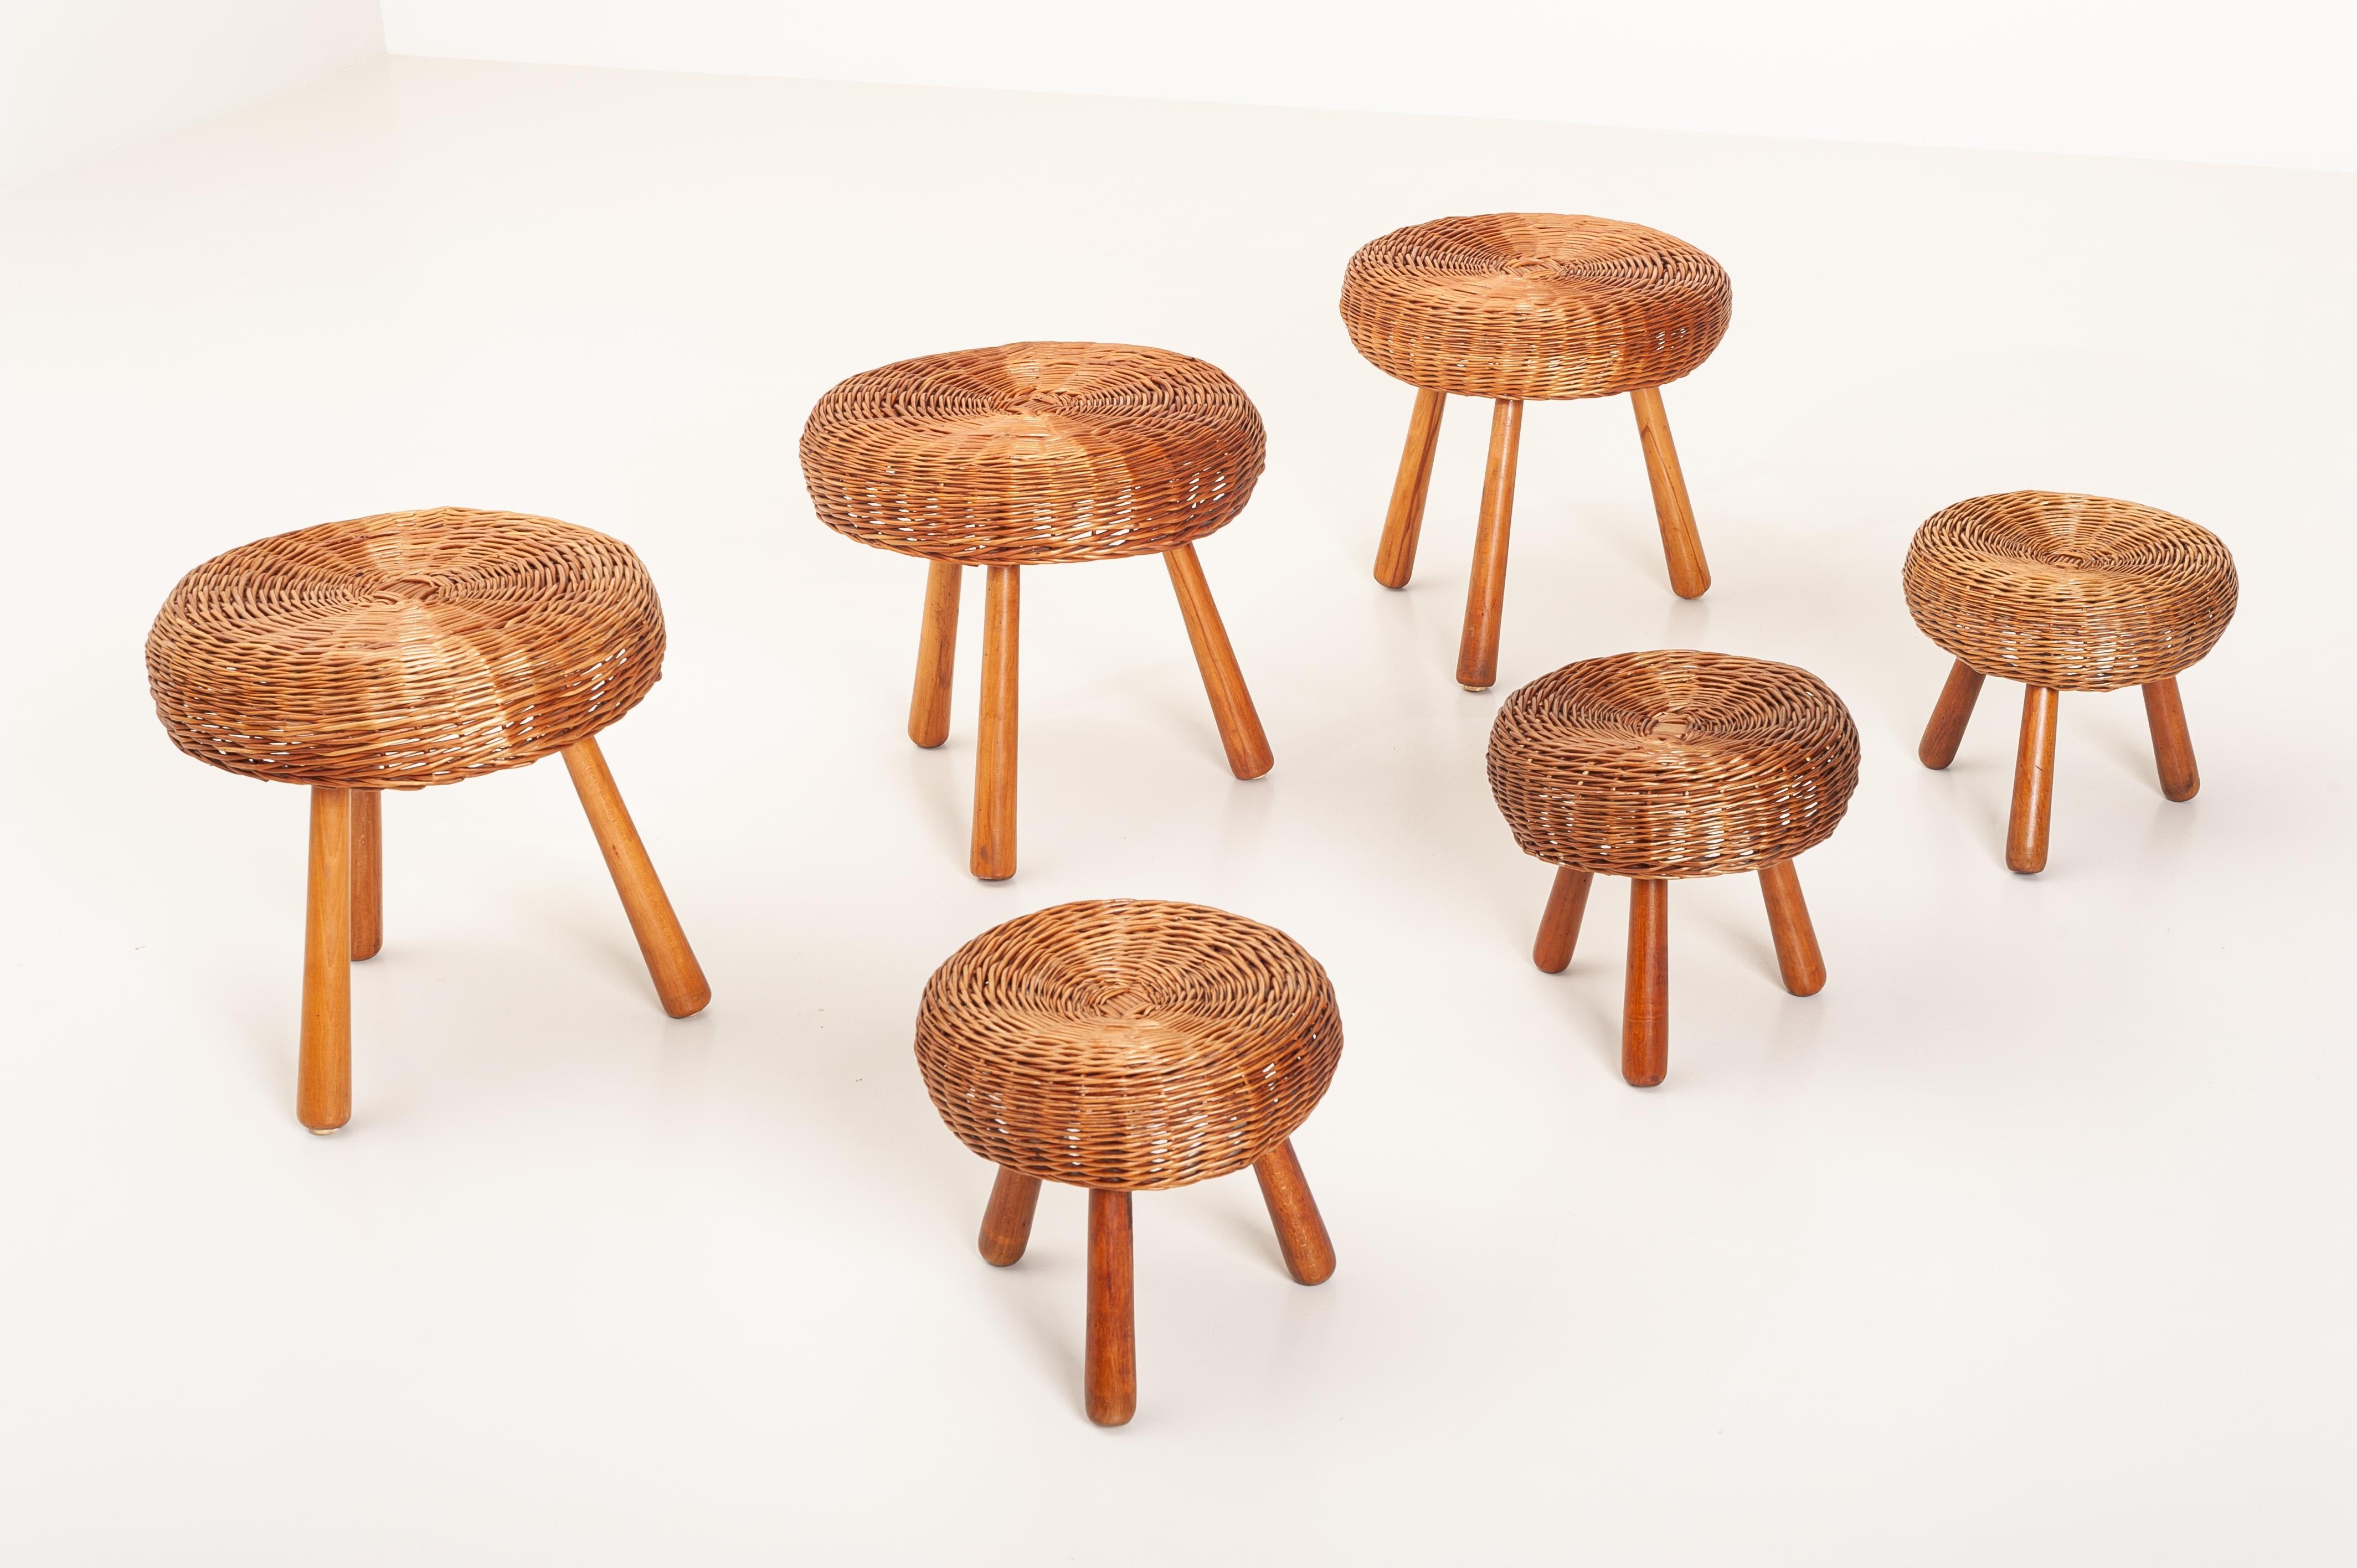 American Tony Paul Attributed Stools, Woven Wicker, Solid Beech, United States, 1950s For Sale